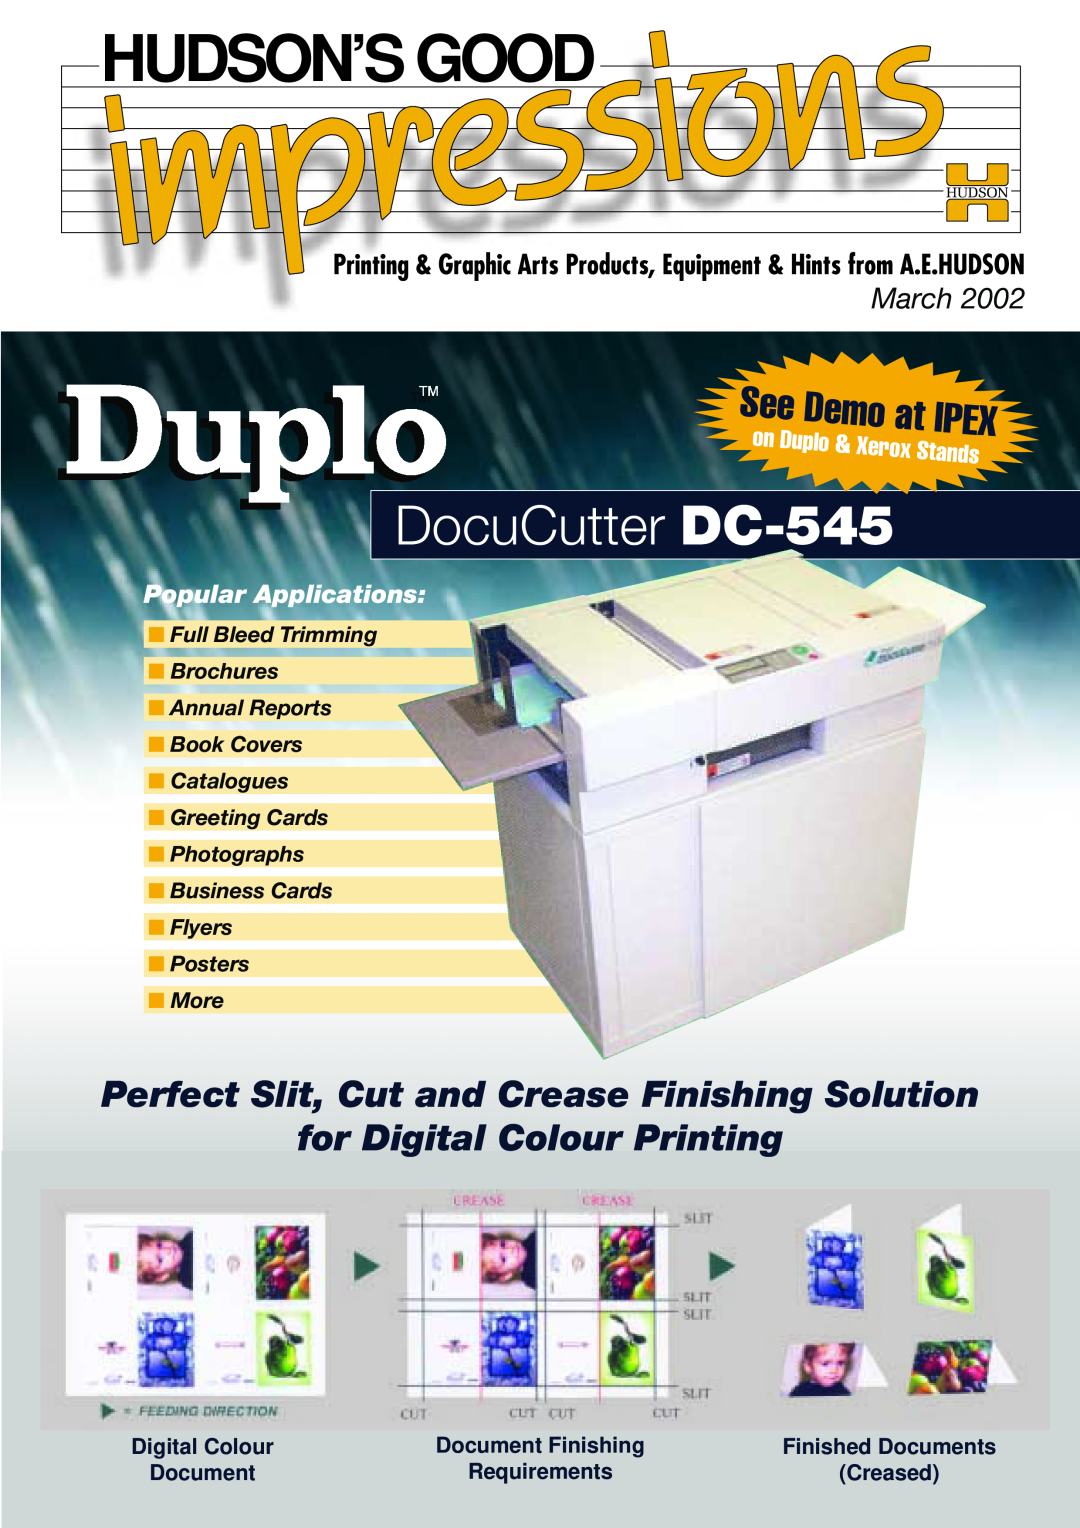 Hudson Sales & Engineering brochure Hudson’S Good, DocuCutter DC-545, Perfect Slit, Cut and Crease Finishing Solution 